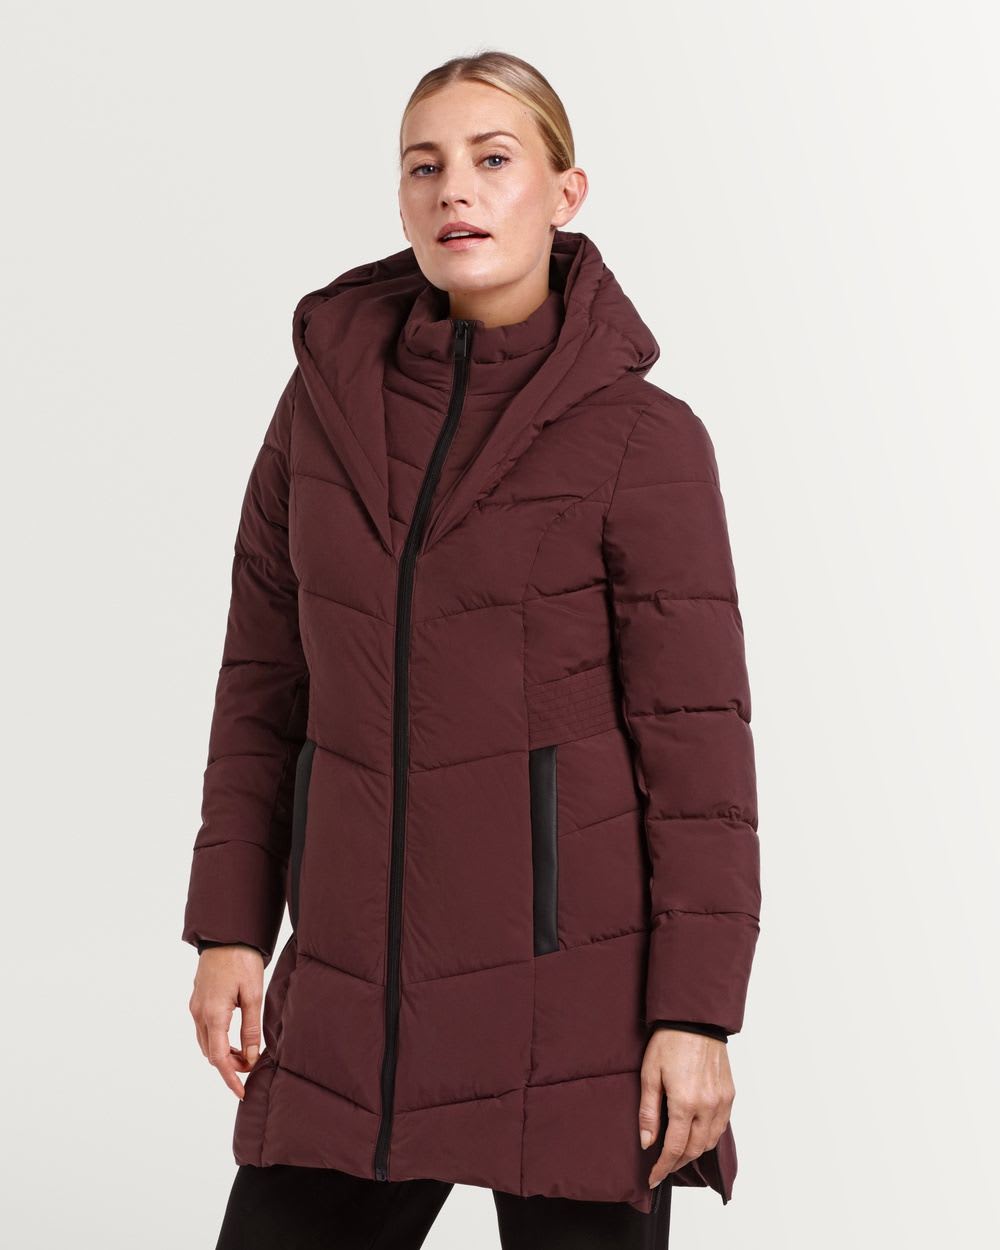 Quilted Coat with Faux Fur Collar